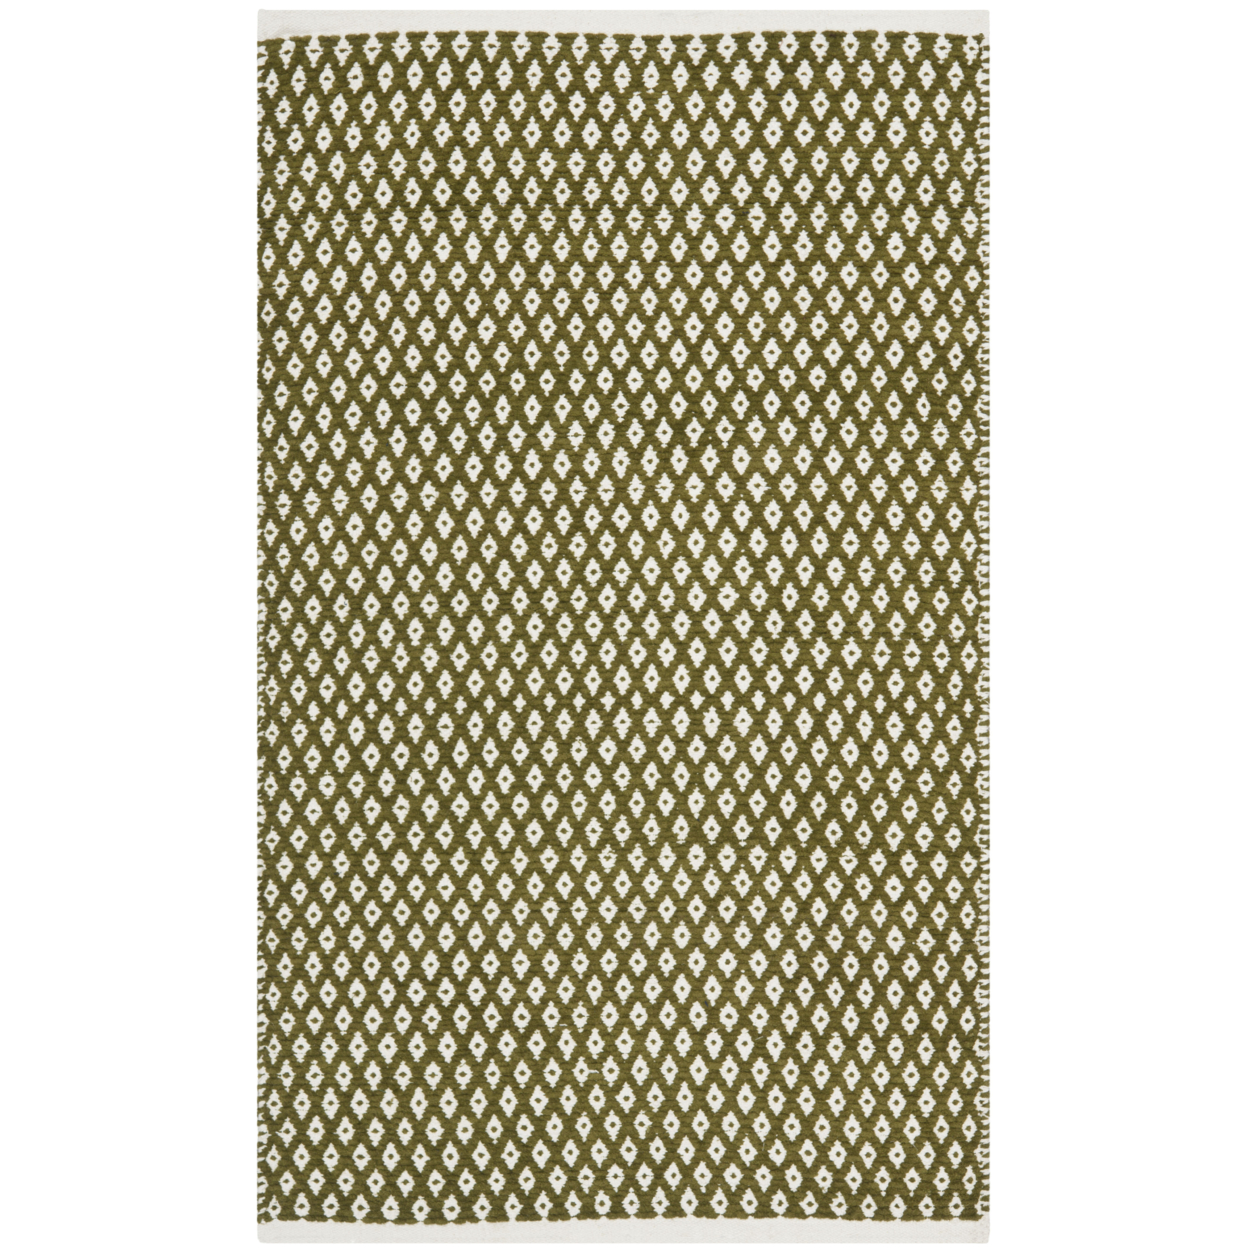 SAFAVIEH Boston Collection BOS685B Handwoven Olive Rug - 2' 6 X 4'